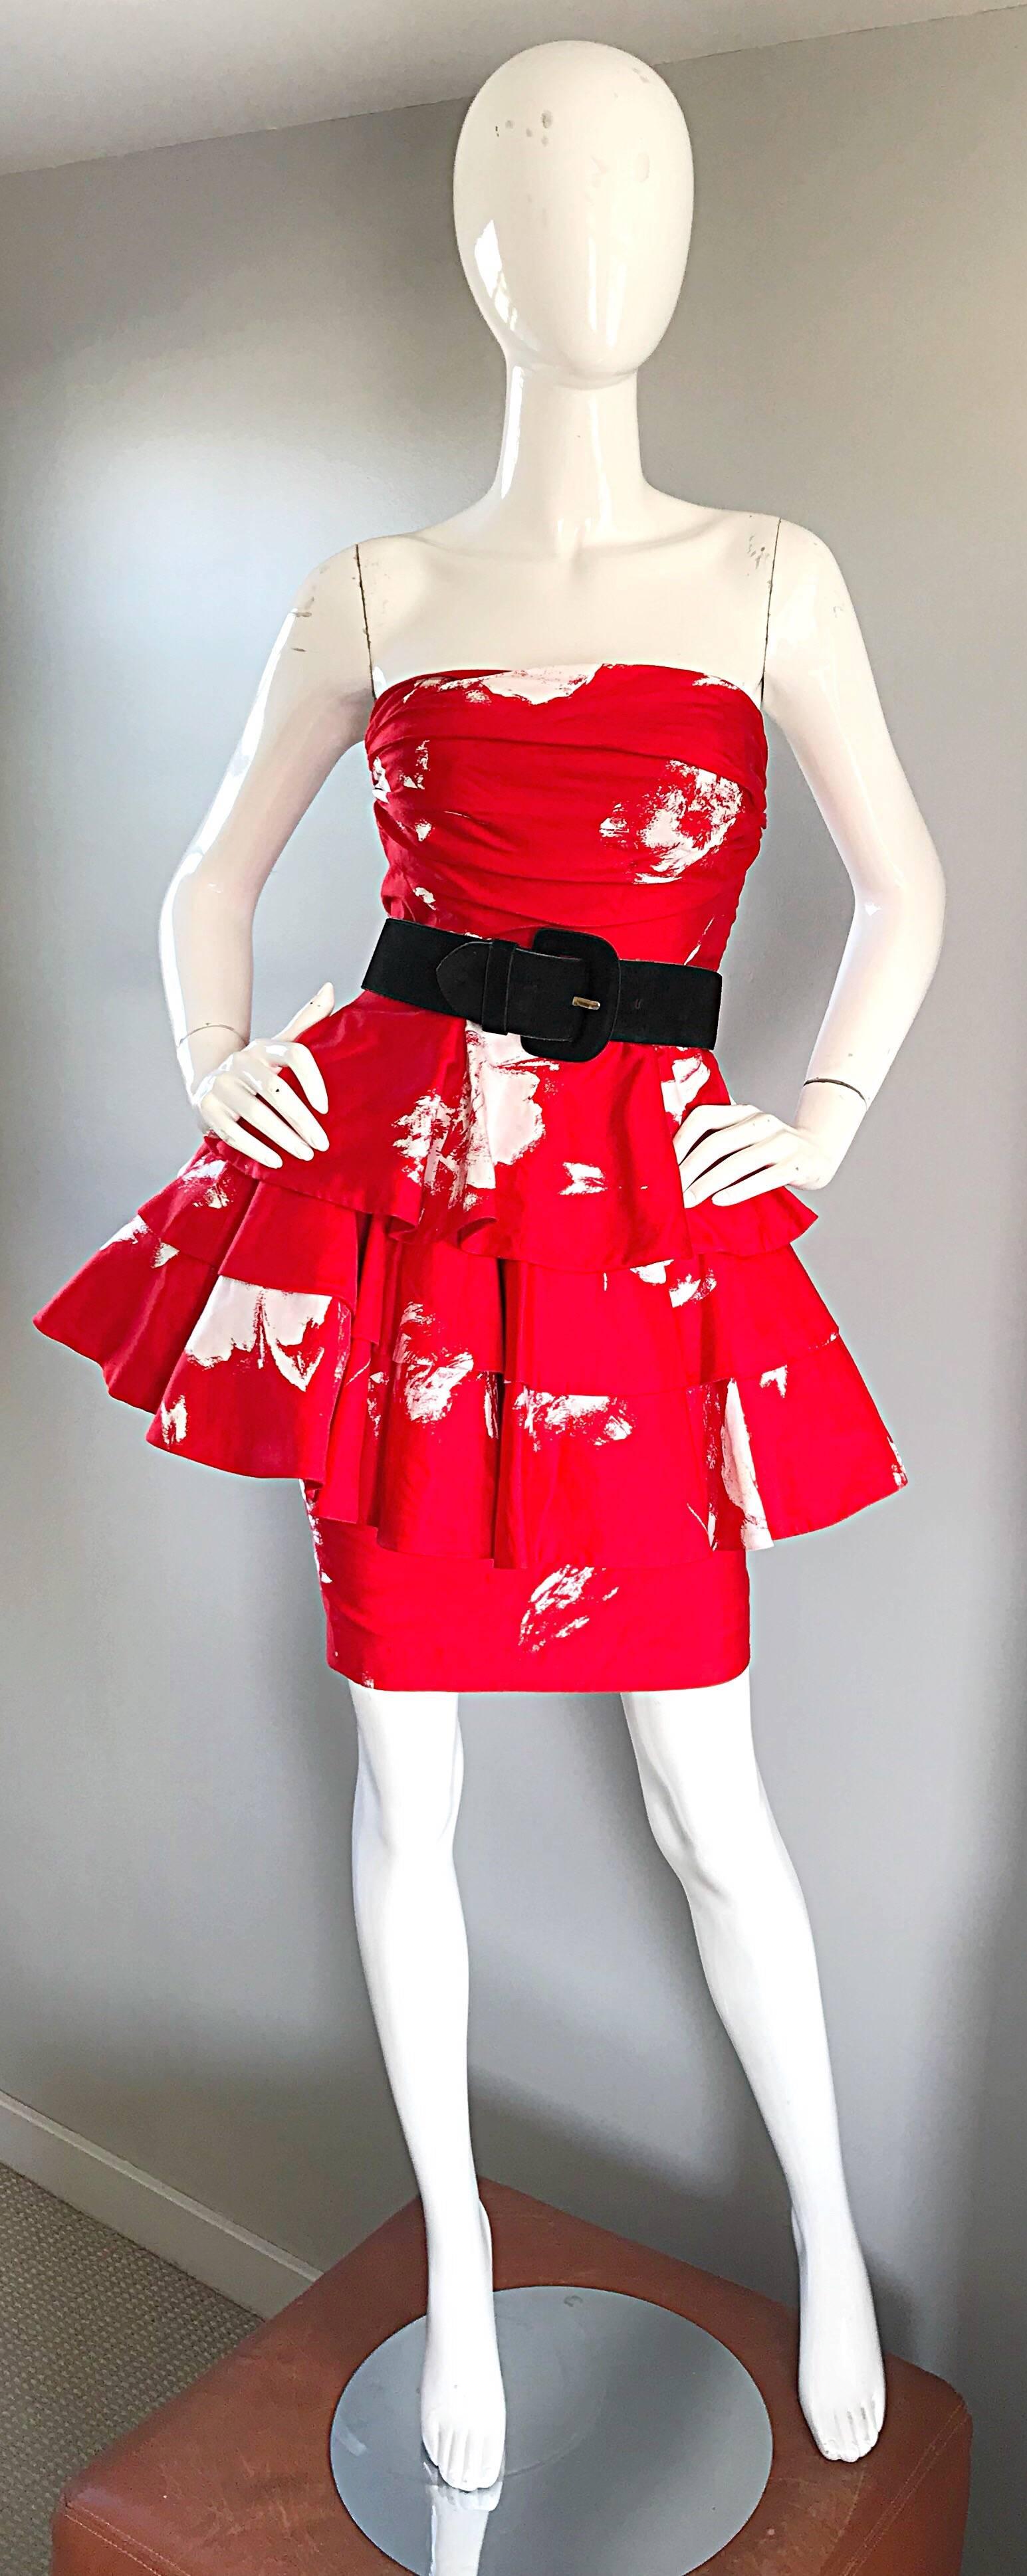 1990s Barboglio Cristina Jan Red + White Two Piece Vintage Top and Skirt Dress In Excellent Condition For Sale In San Diego, CA